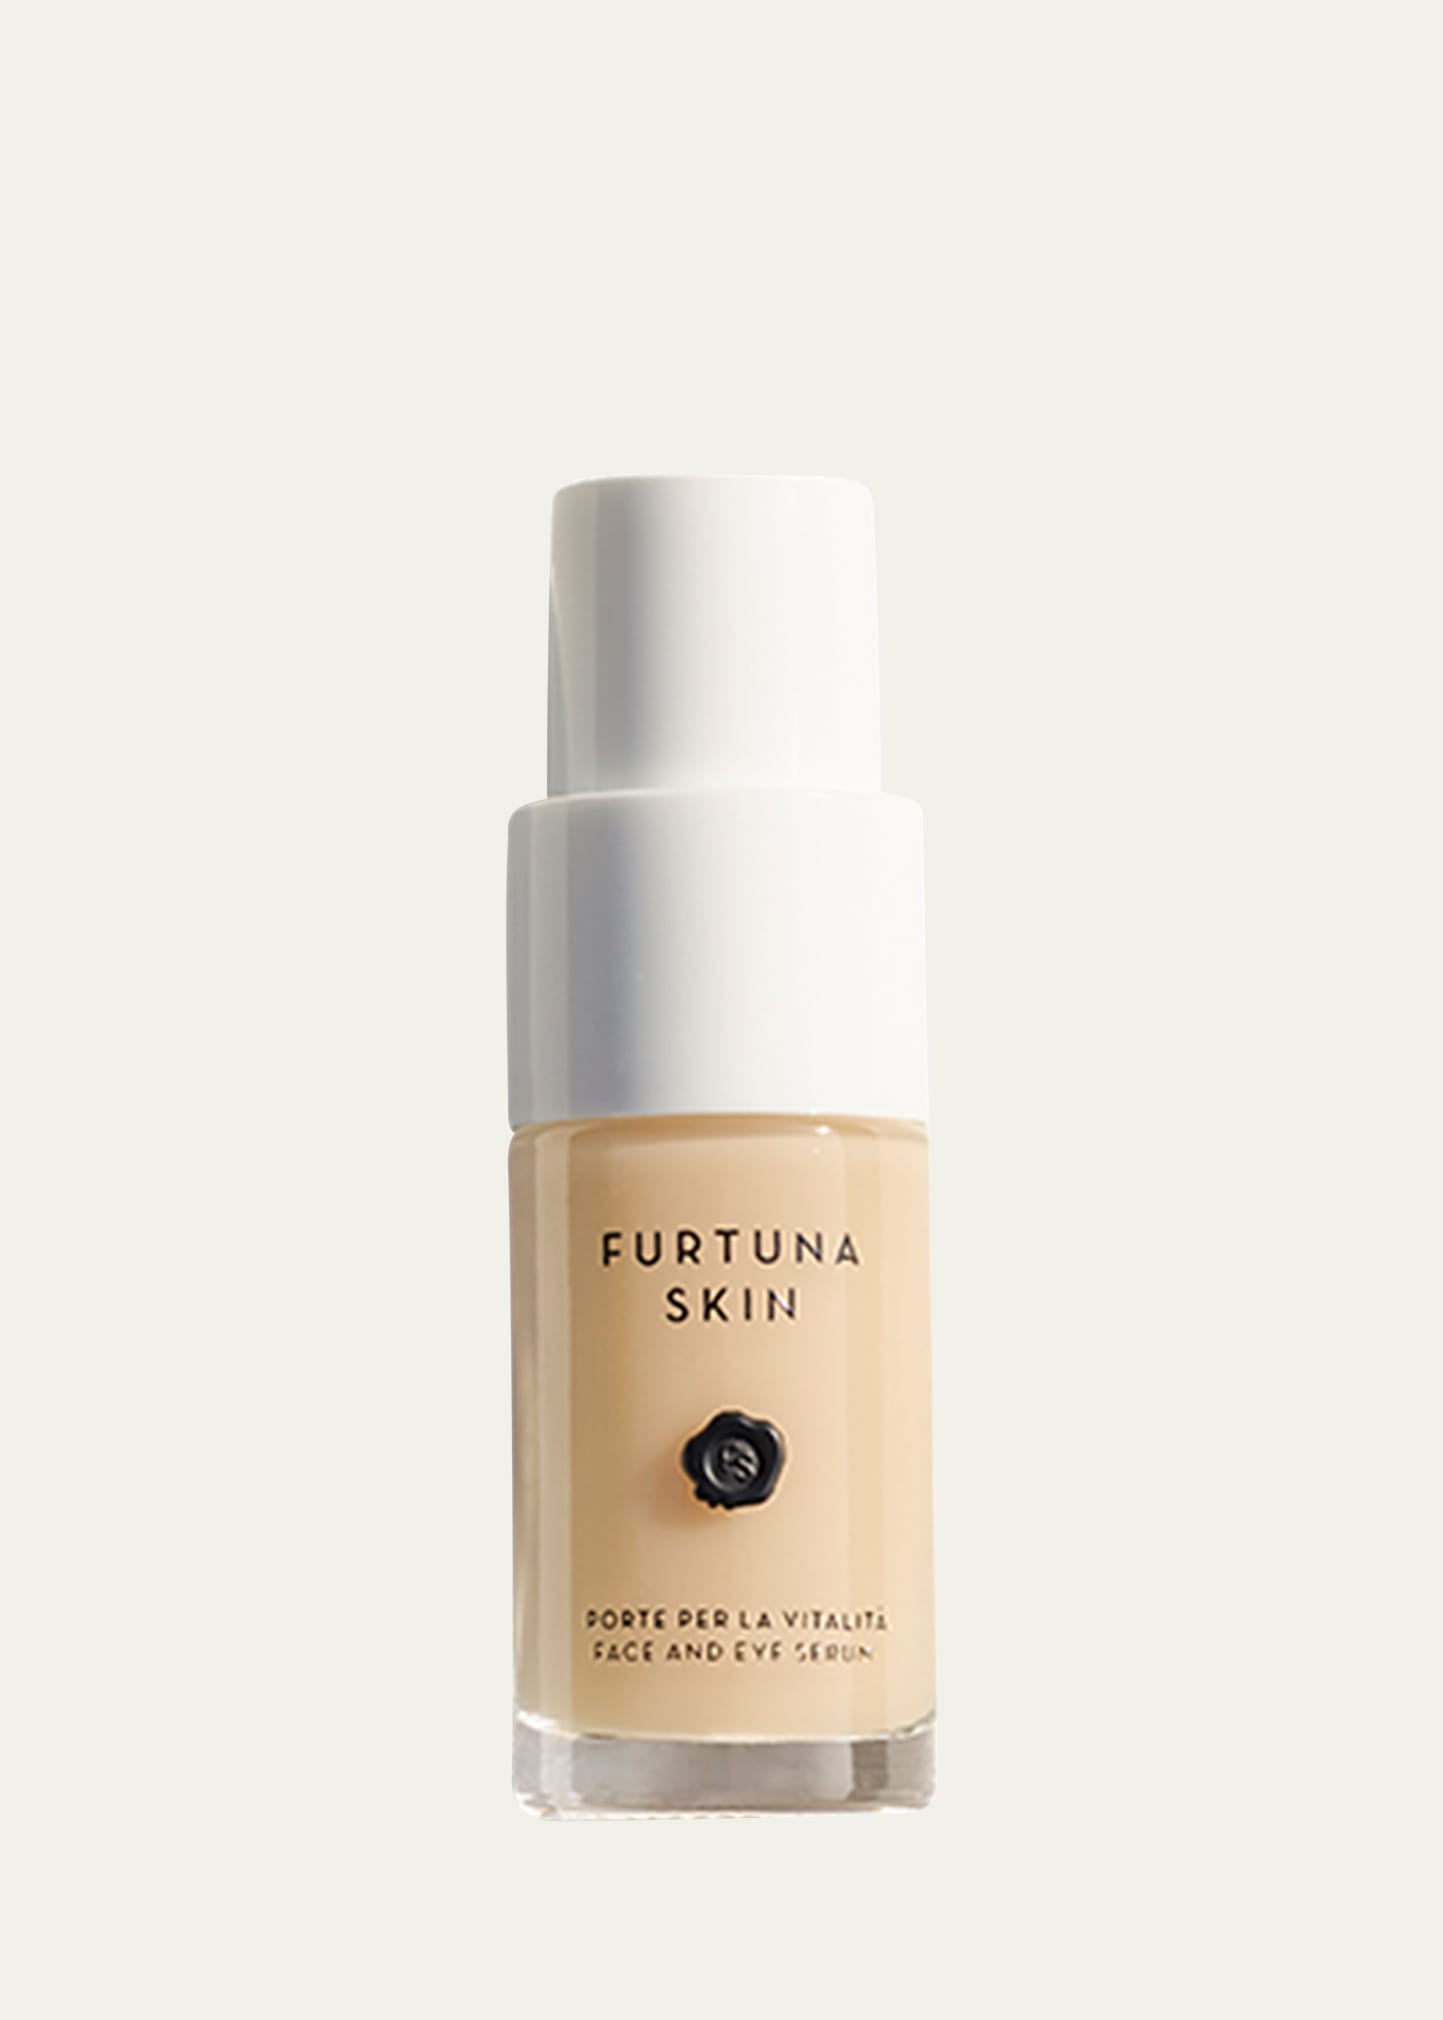 0.5 oz. Face & Eye Serum Travel Size, Yours with any $275 Furtuna Skin Purchase